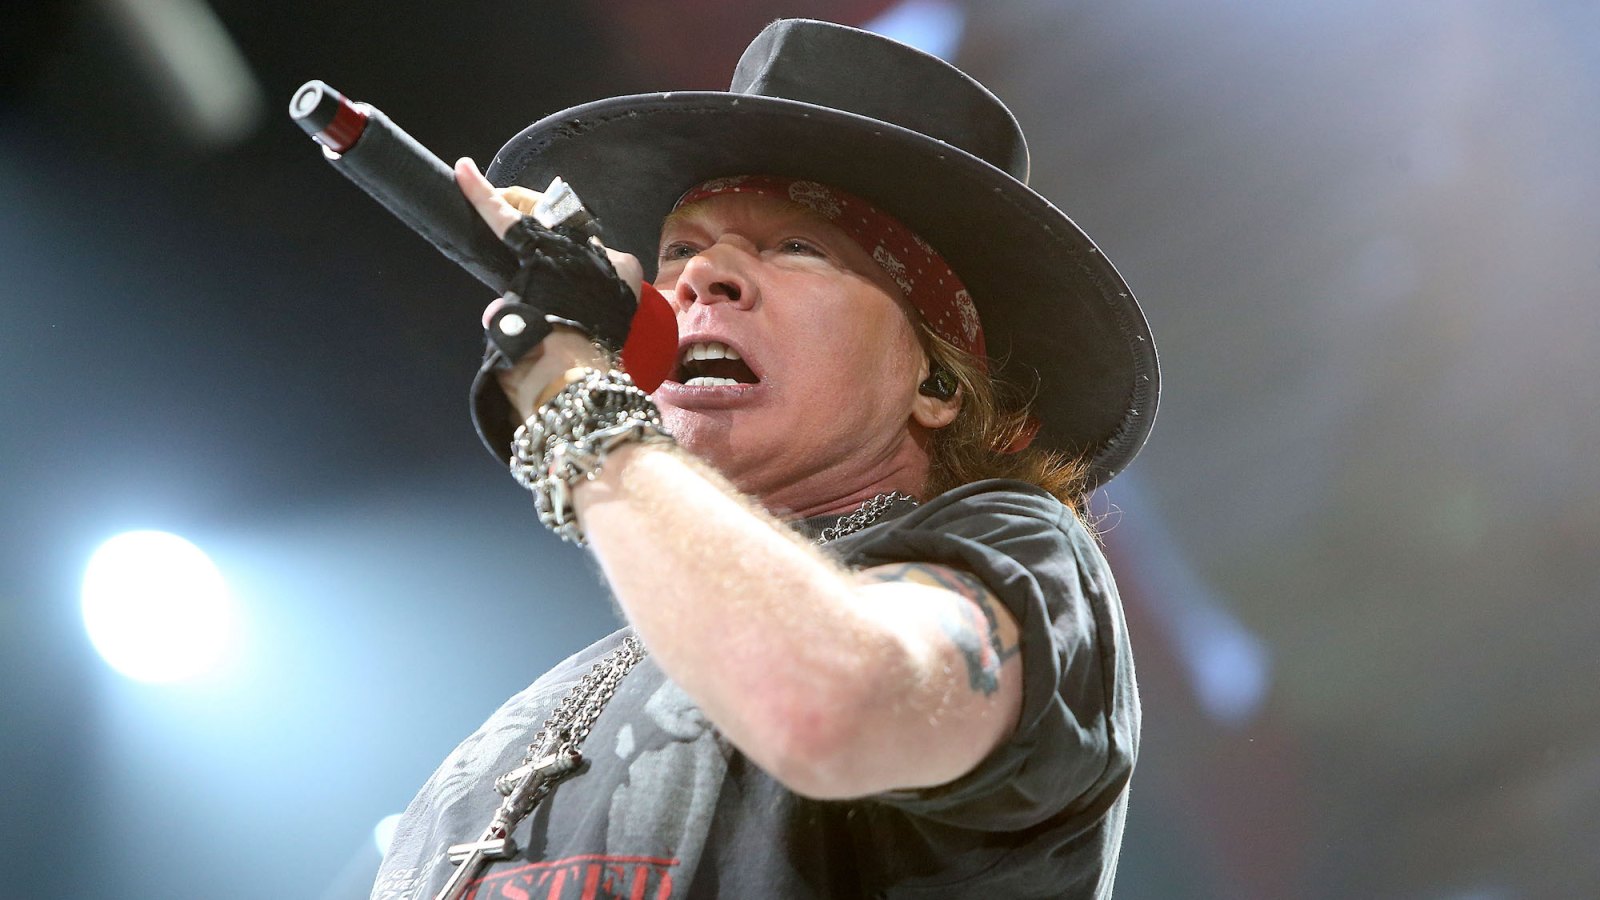 Guns N Roses Frontman Axl Rose Accused of Sexual Assault From 1989